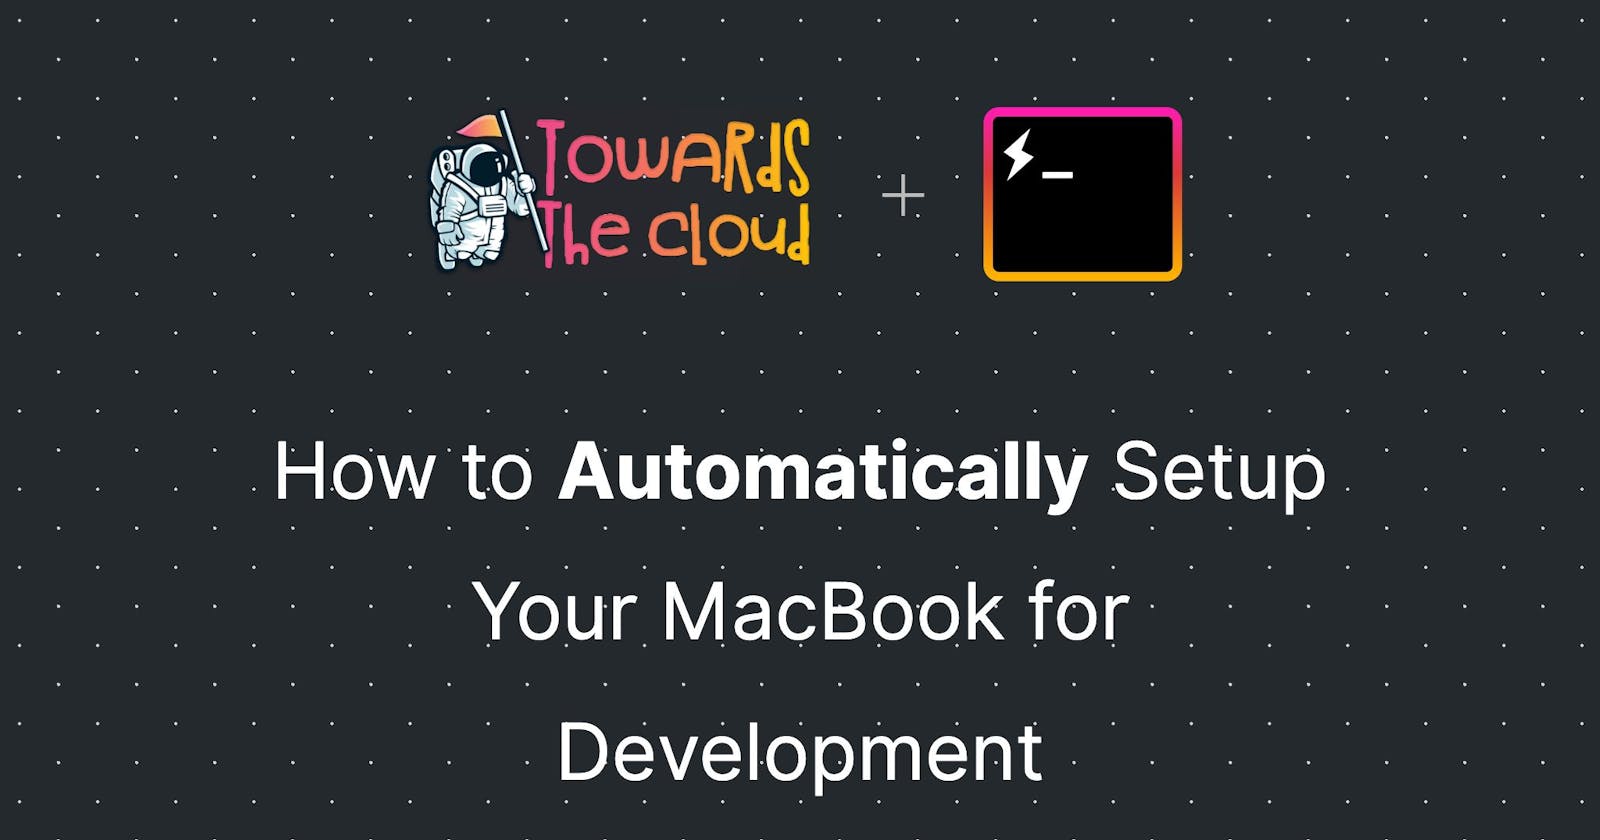 How to Automatically Setup Your MacBook for Development